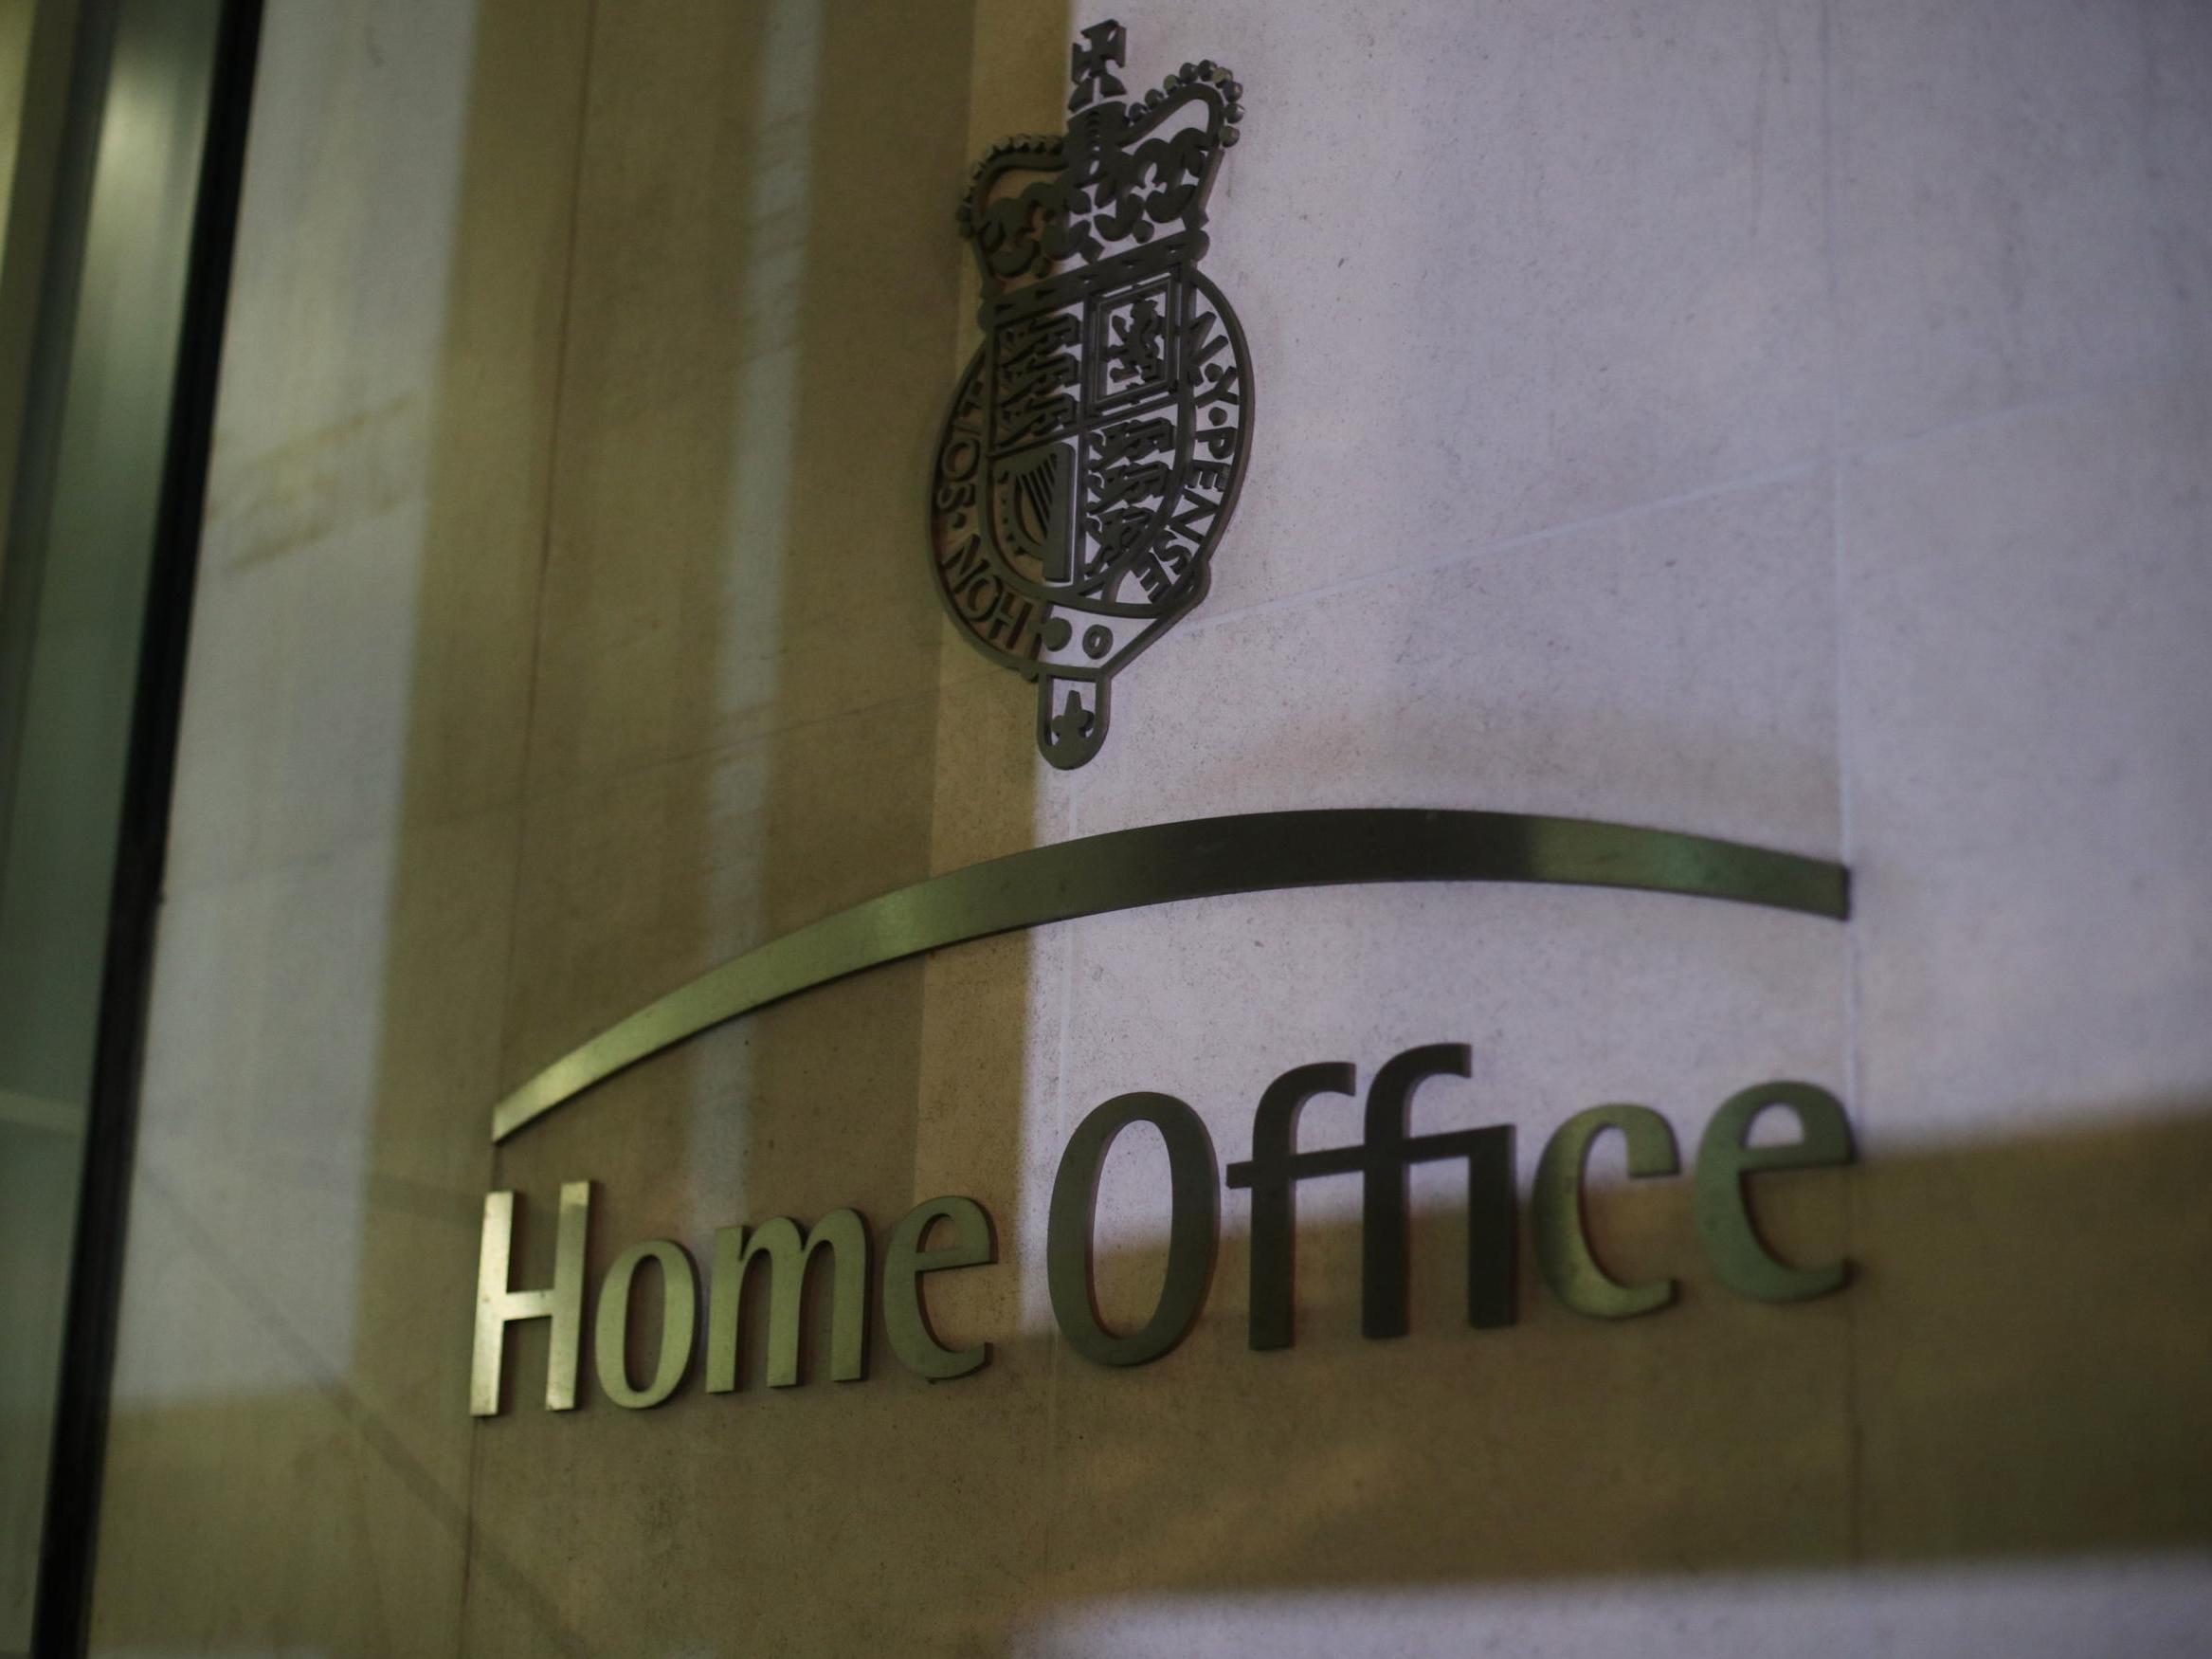 Home Office lawyers routinely deploying 'legally unsound' arguments in court, say immigration solicitors